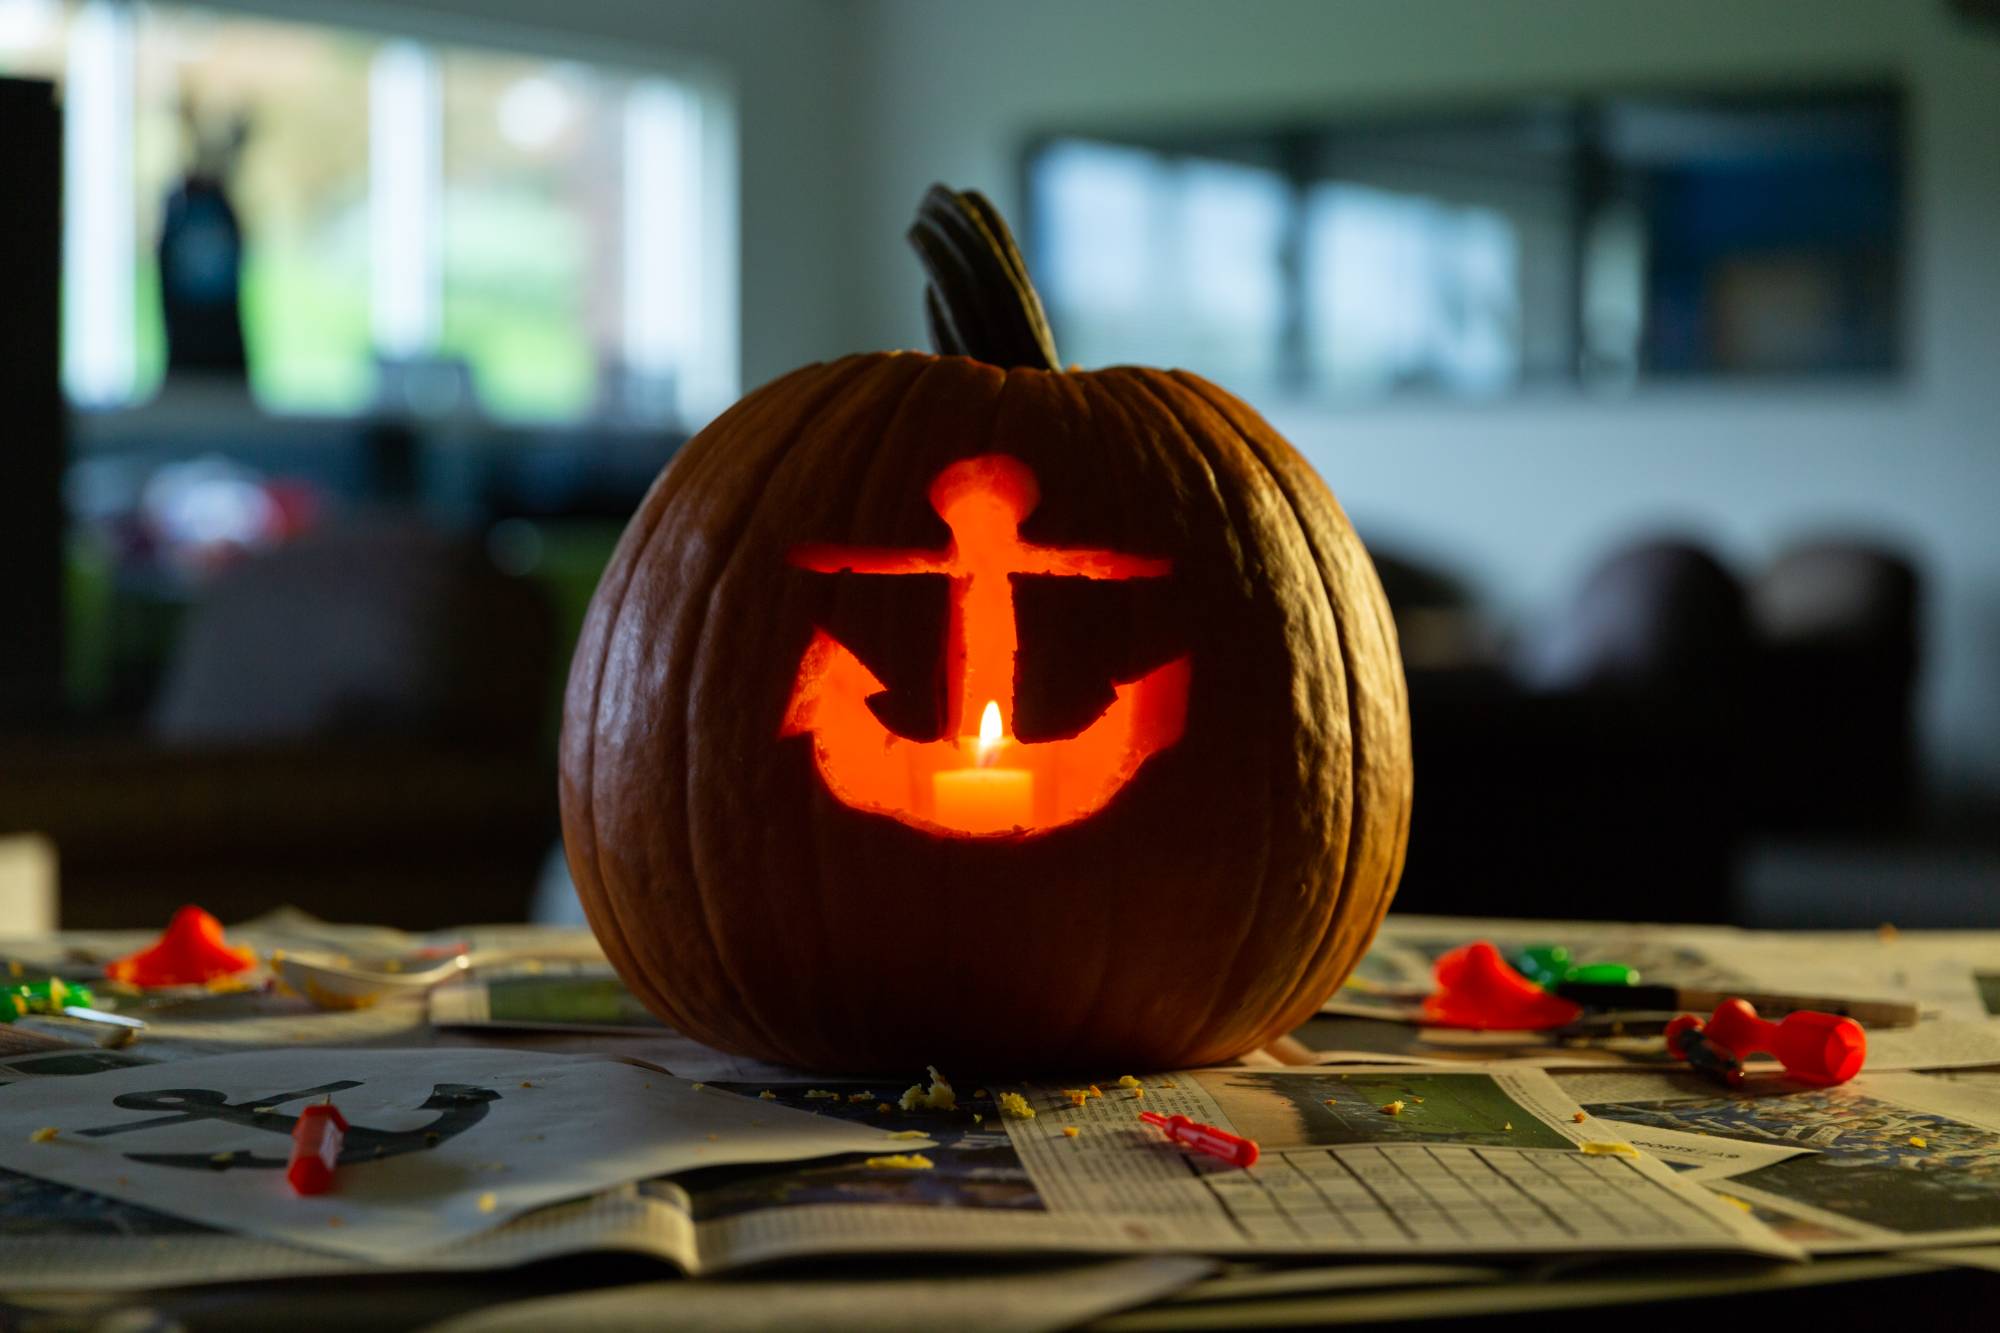 Pumpkin carved with anchor